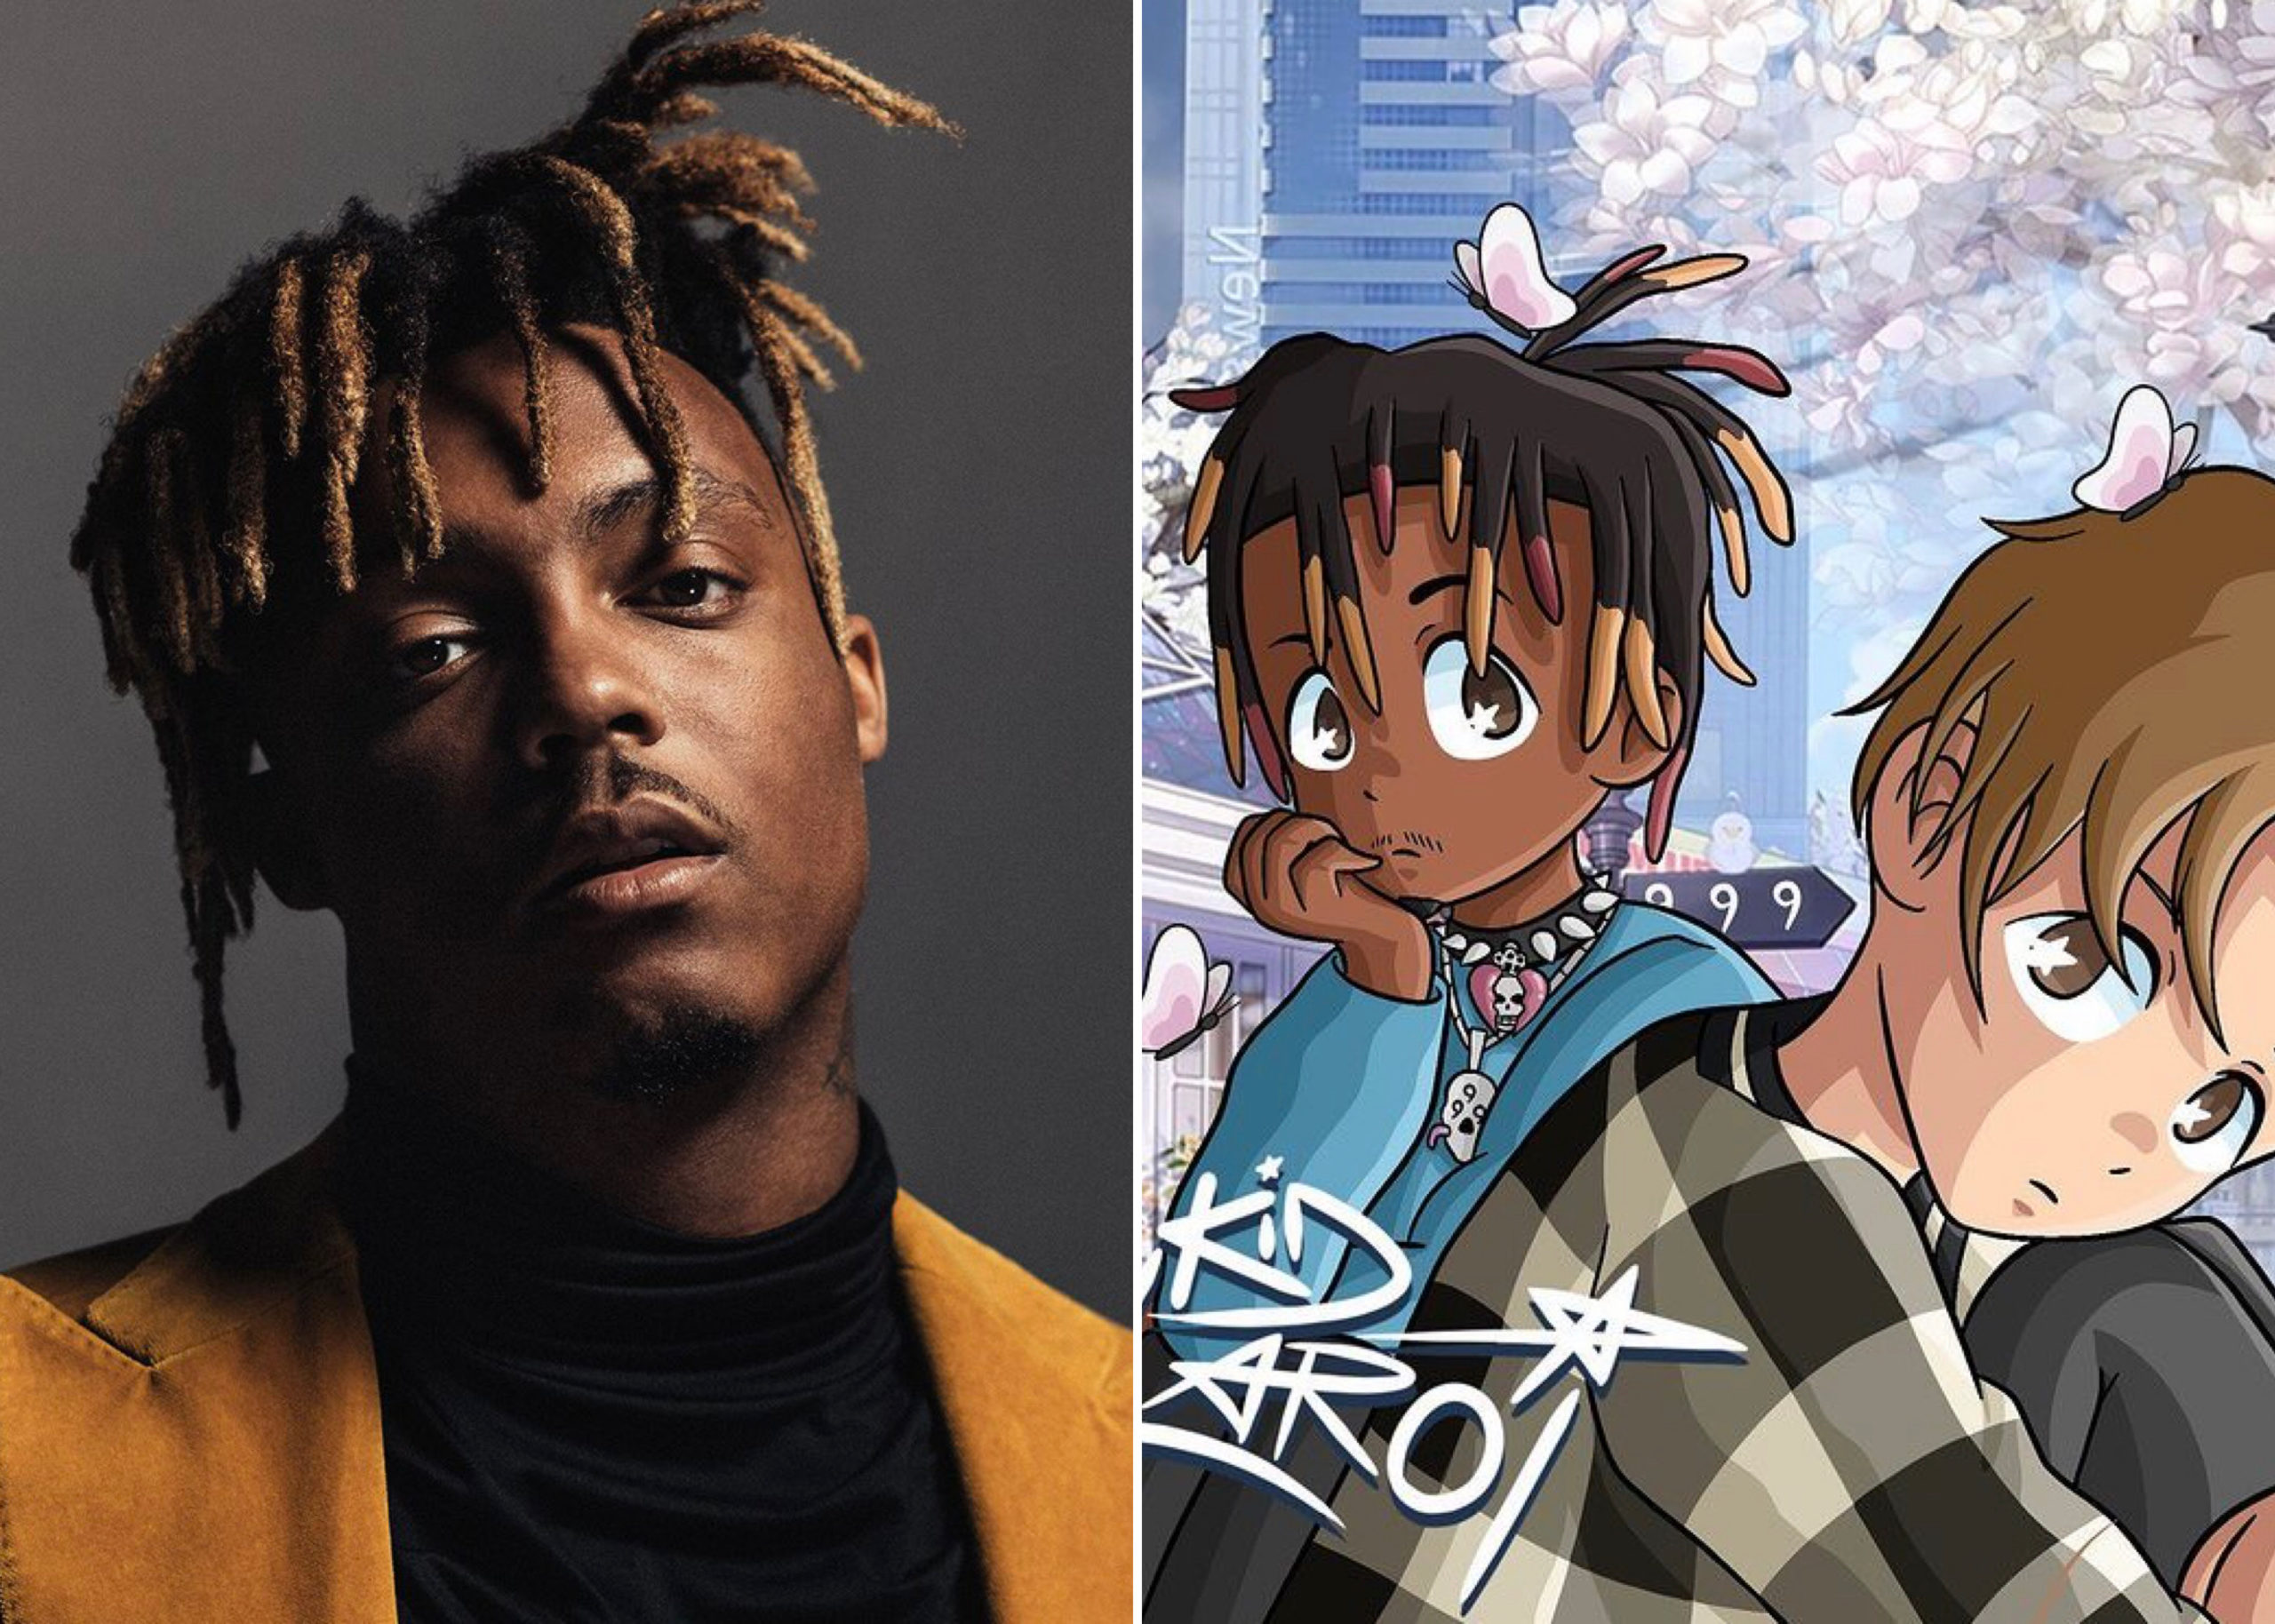 Fans Mourn As The Kid Laroi Releases Posthumous Juice WRLD Song "Reminds Me Of You” One Year After Death